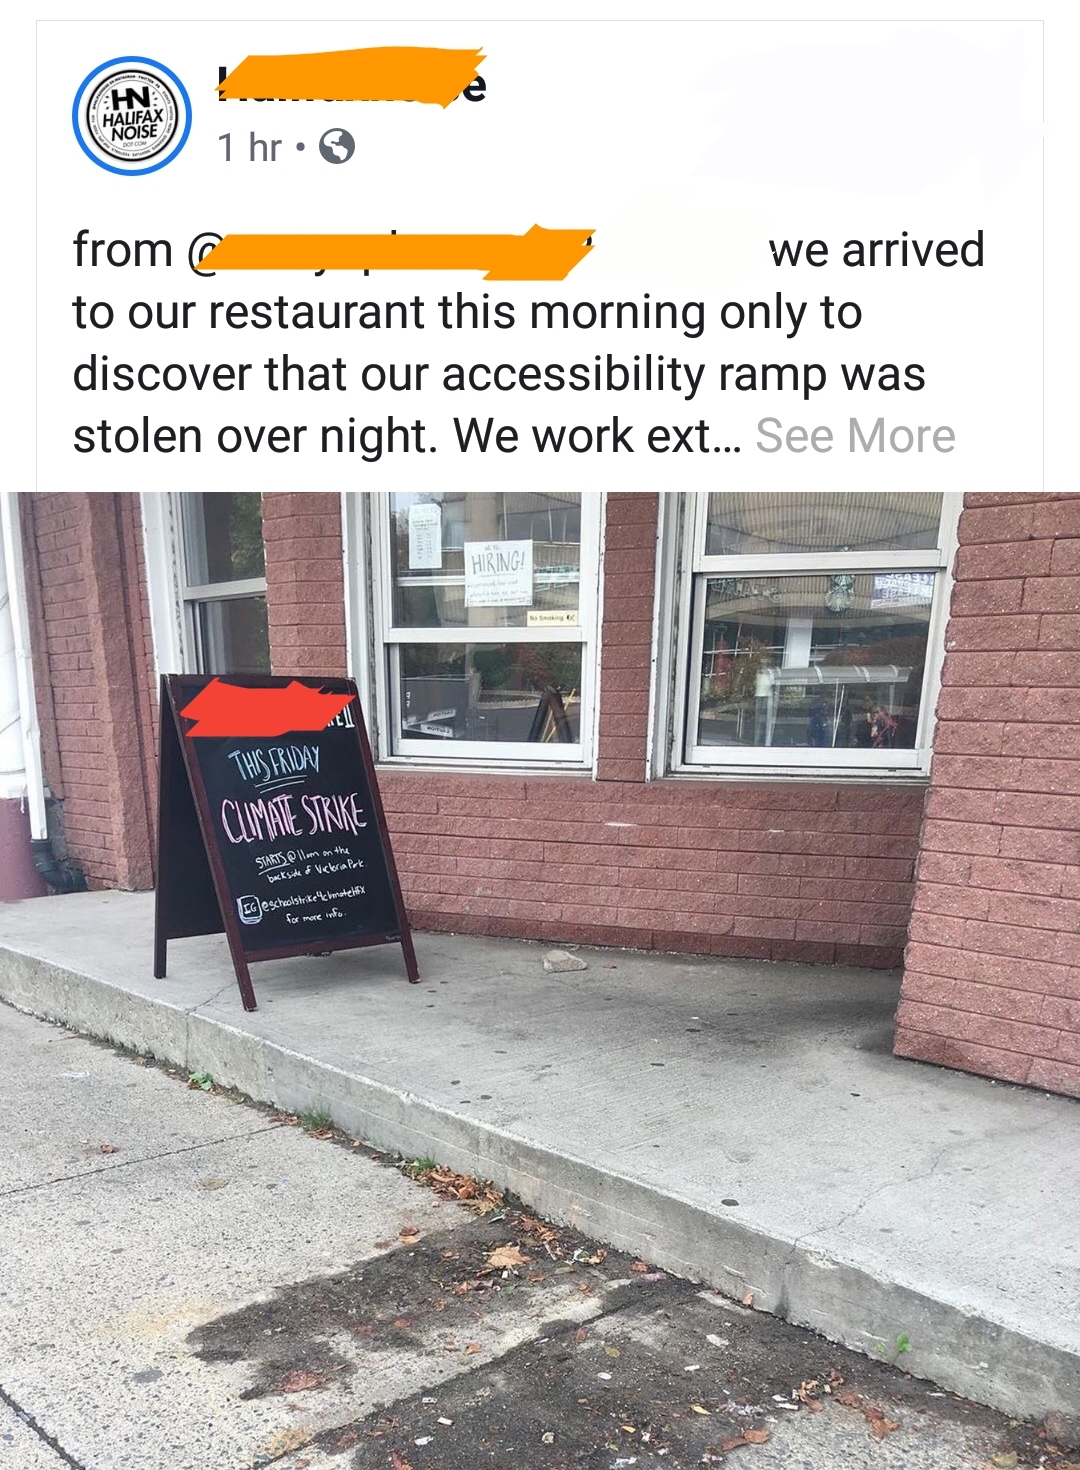 window - a 1 hr. from we arrived to our restaurant this morning only to discover that our accessibility ramp was stolen over night. We work ext... See More Wsime